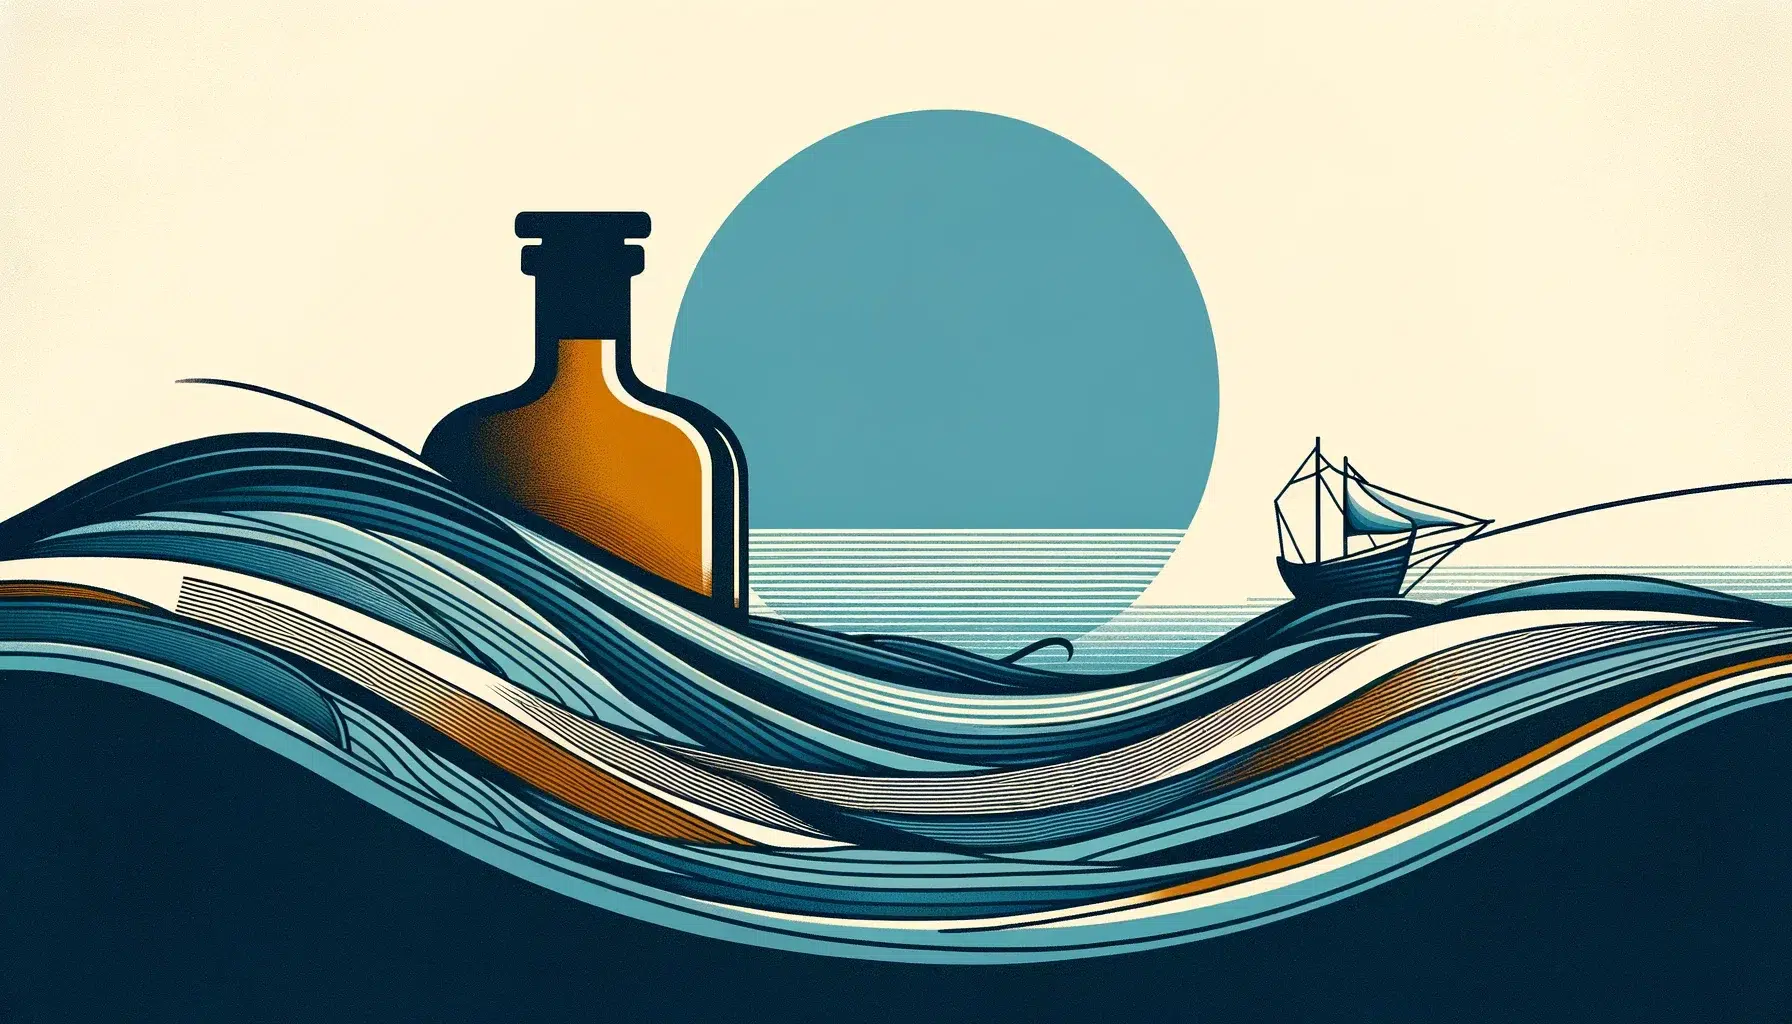 Stylized ocean waves with bottle and ship at sunset.